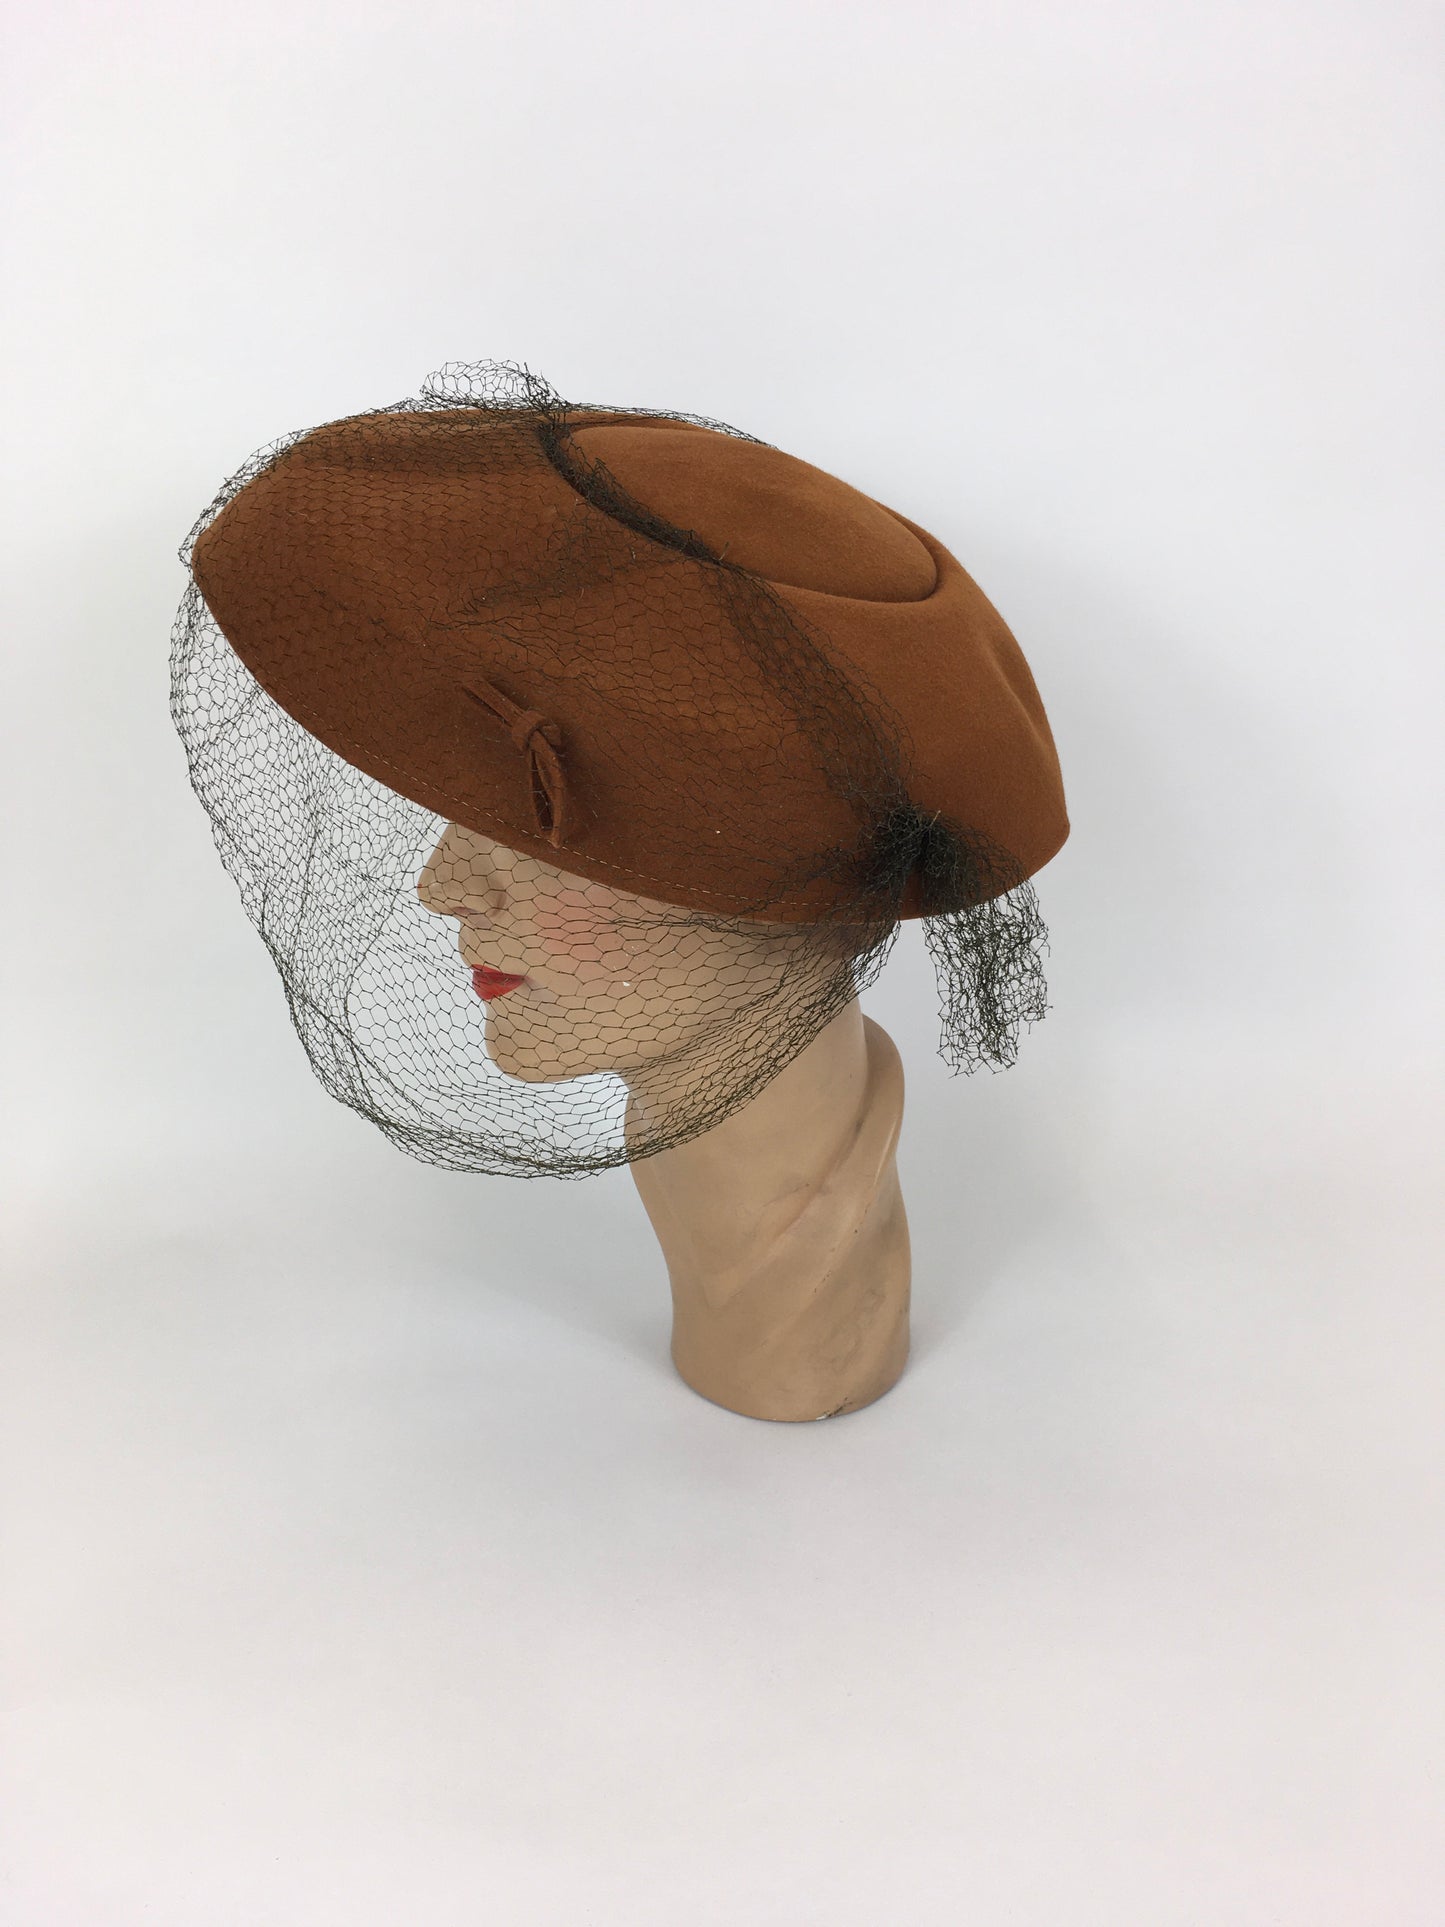 Original SENSATIONAL 1940’s Cinnamon Platter Hat - With Bow and Veiling Detailing